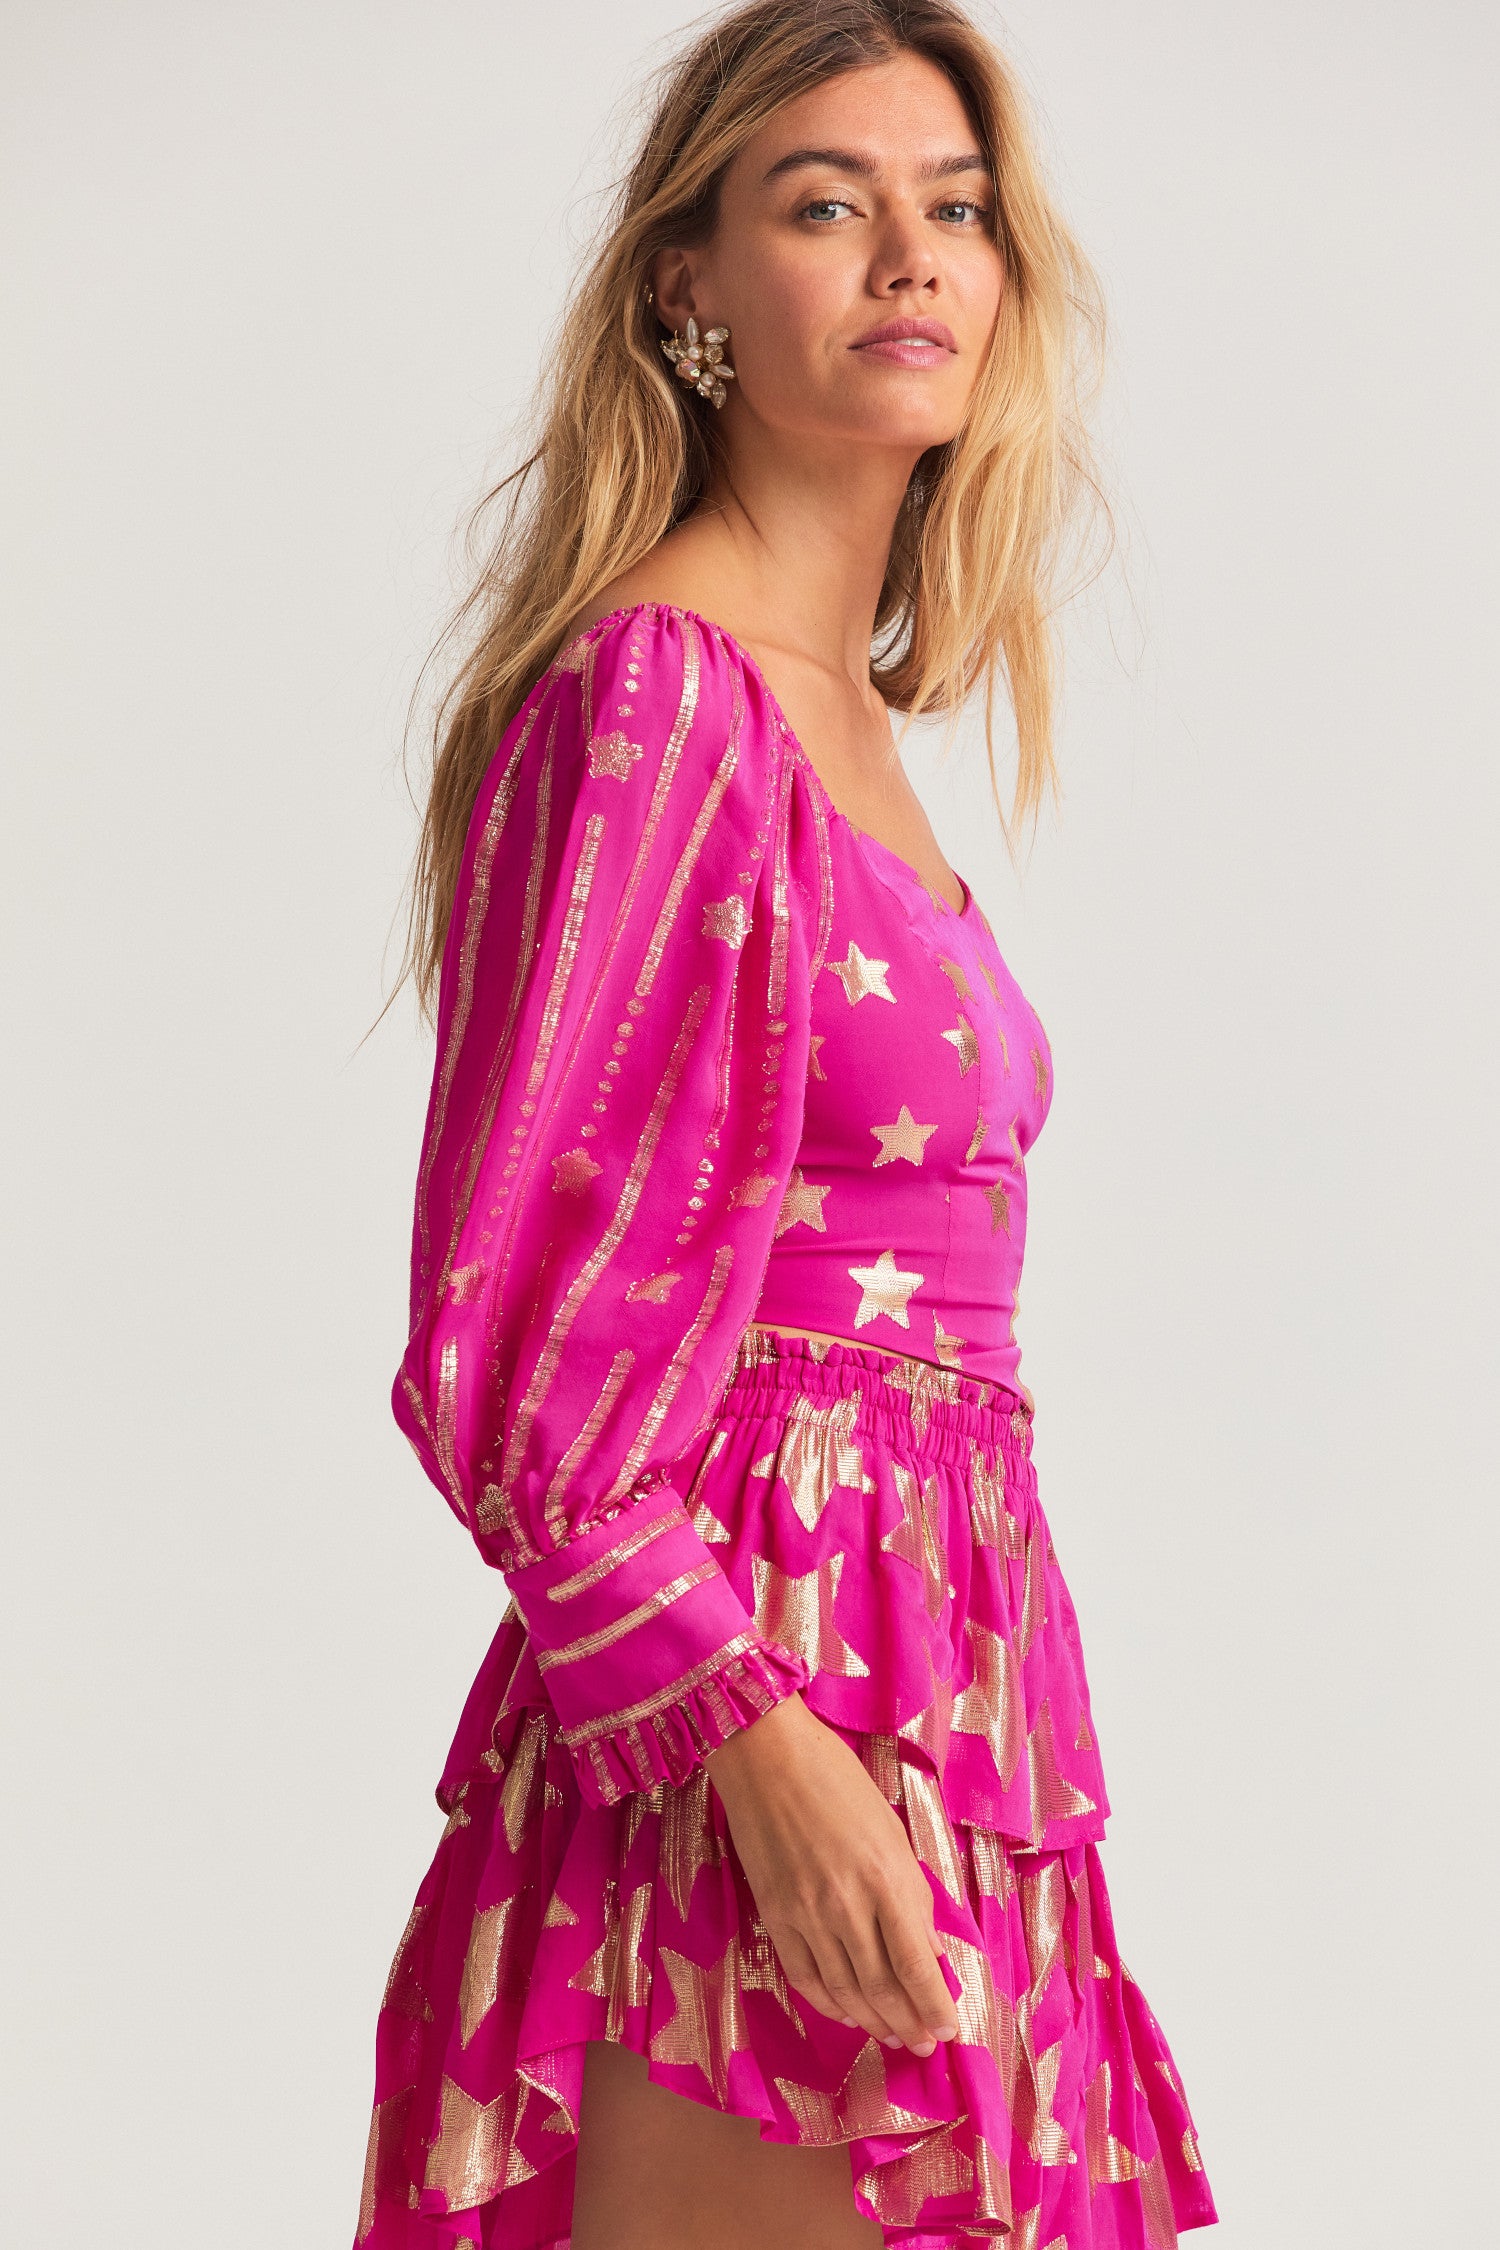 Pink viscose fabric blouse with metallic, gold star detailing. Romantic bishop sleeves with elastic at the shoulder openings. 